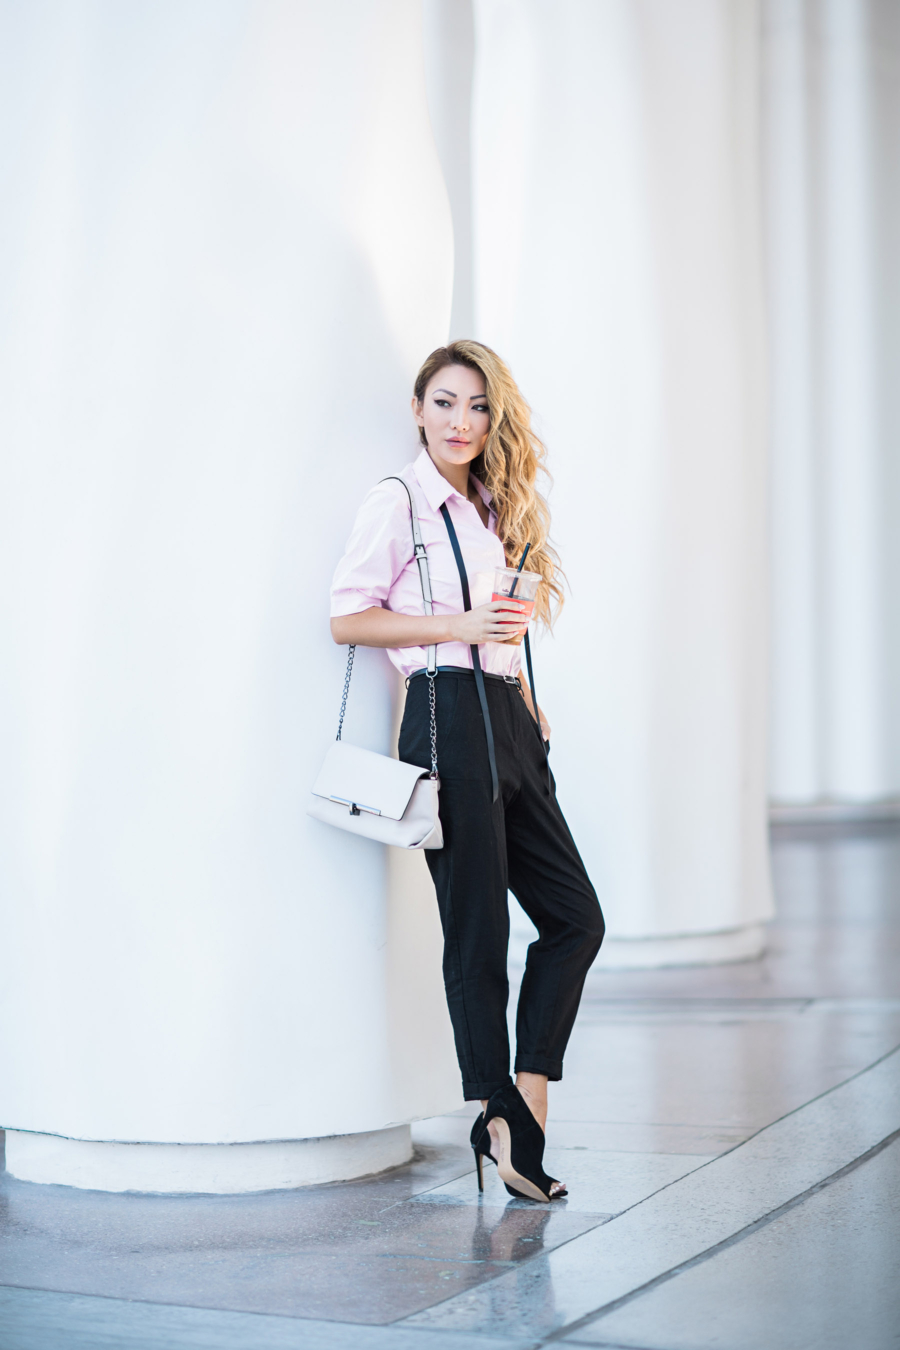 How to Make Connections Online - Stylish Work Outfit // NotJessFashion.com